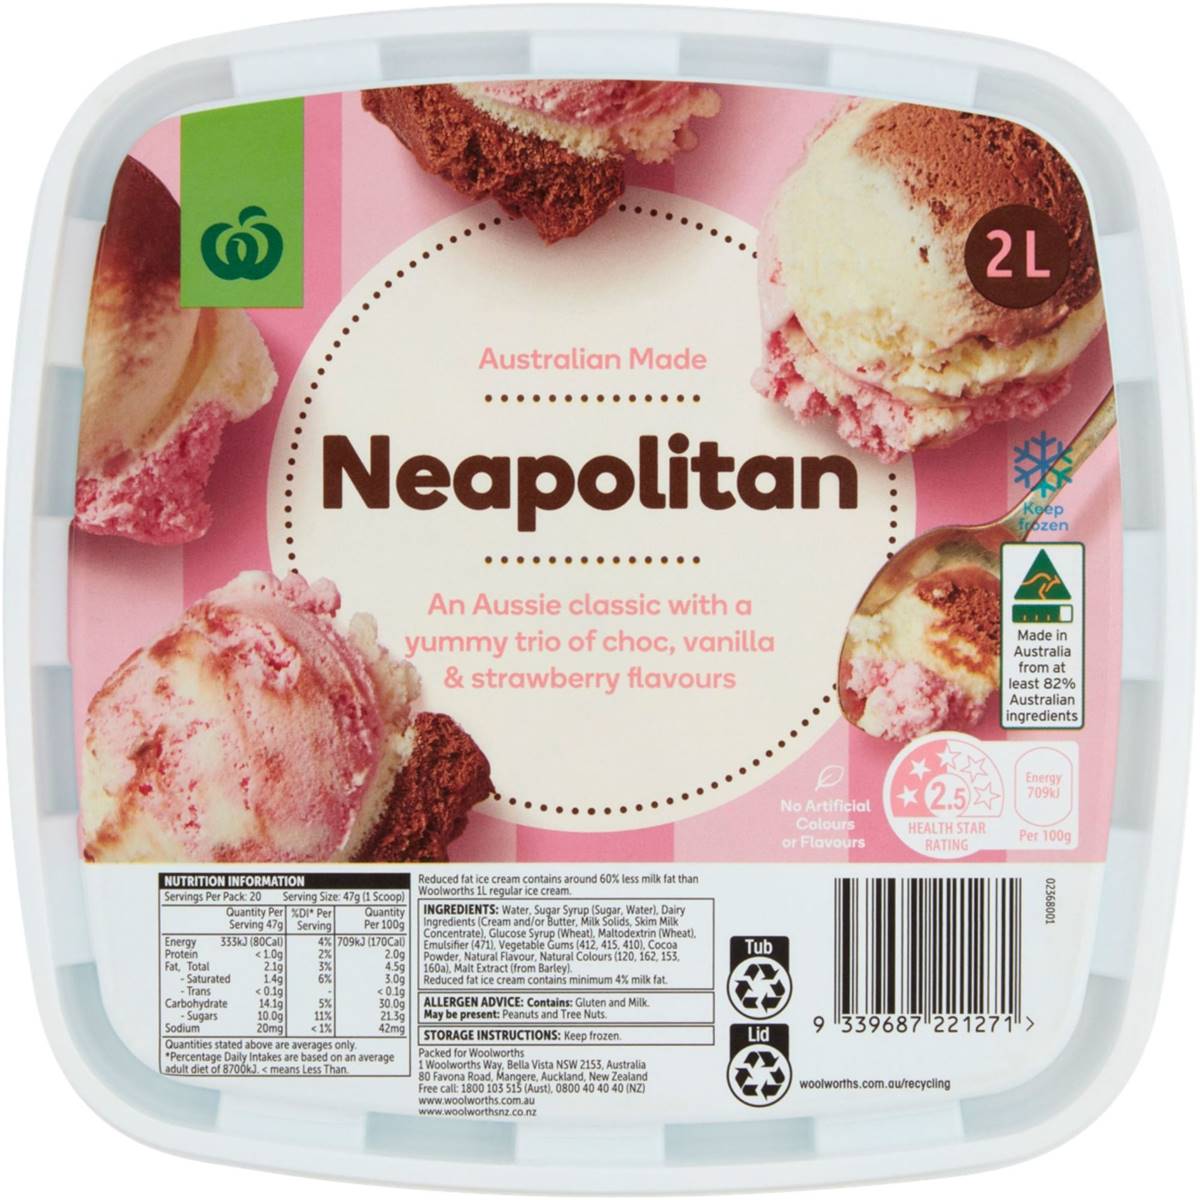 Calories in Woolworths Neapolitan Ice Cream